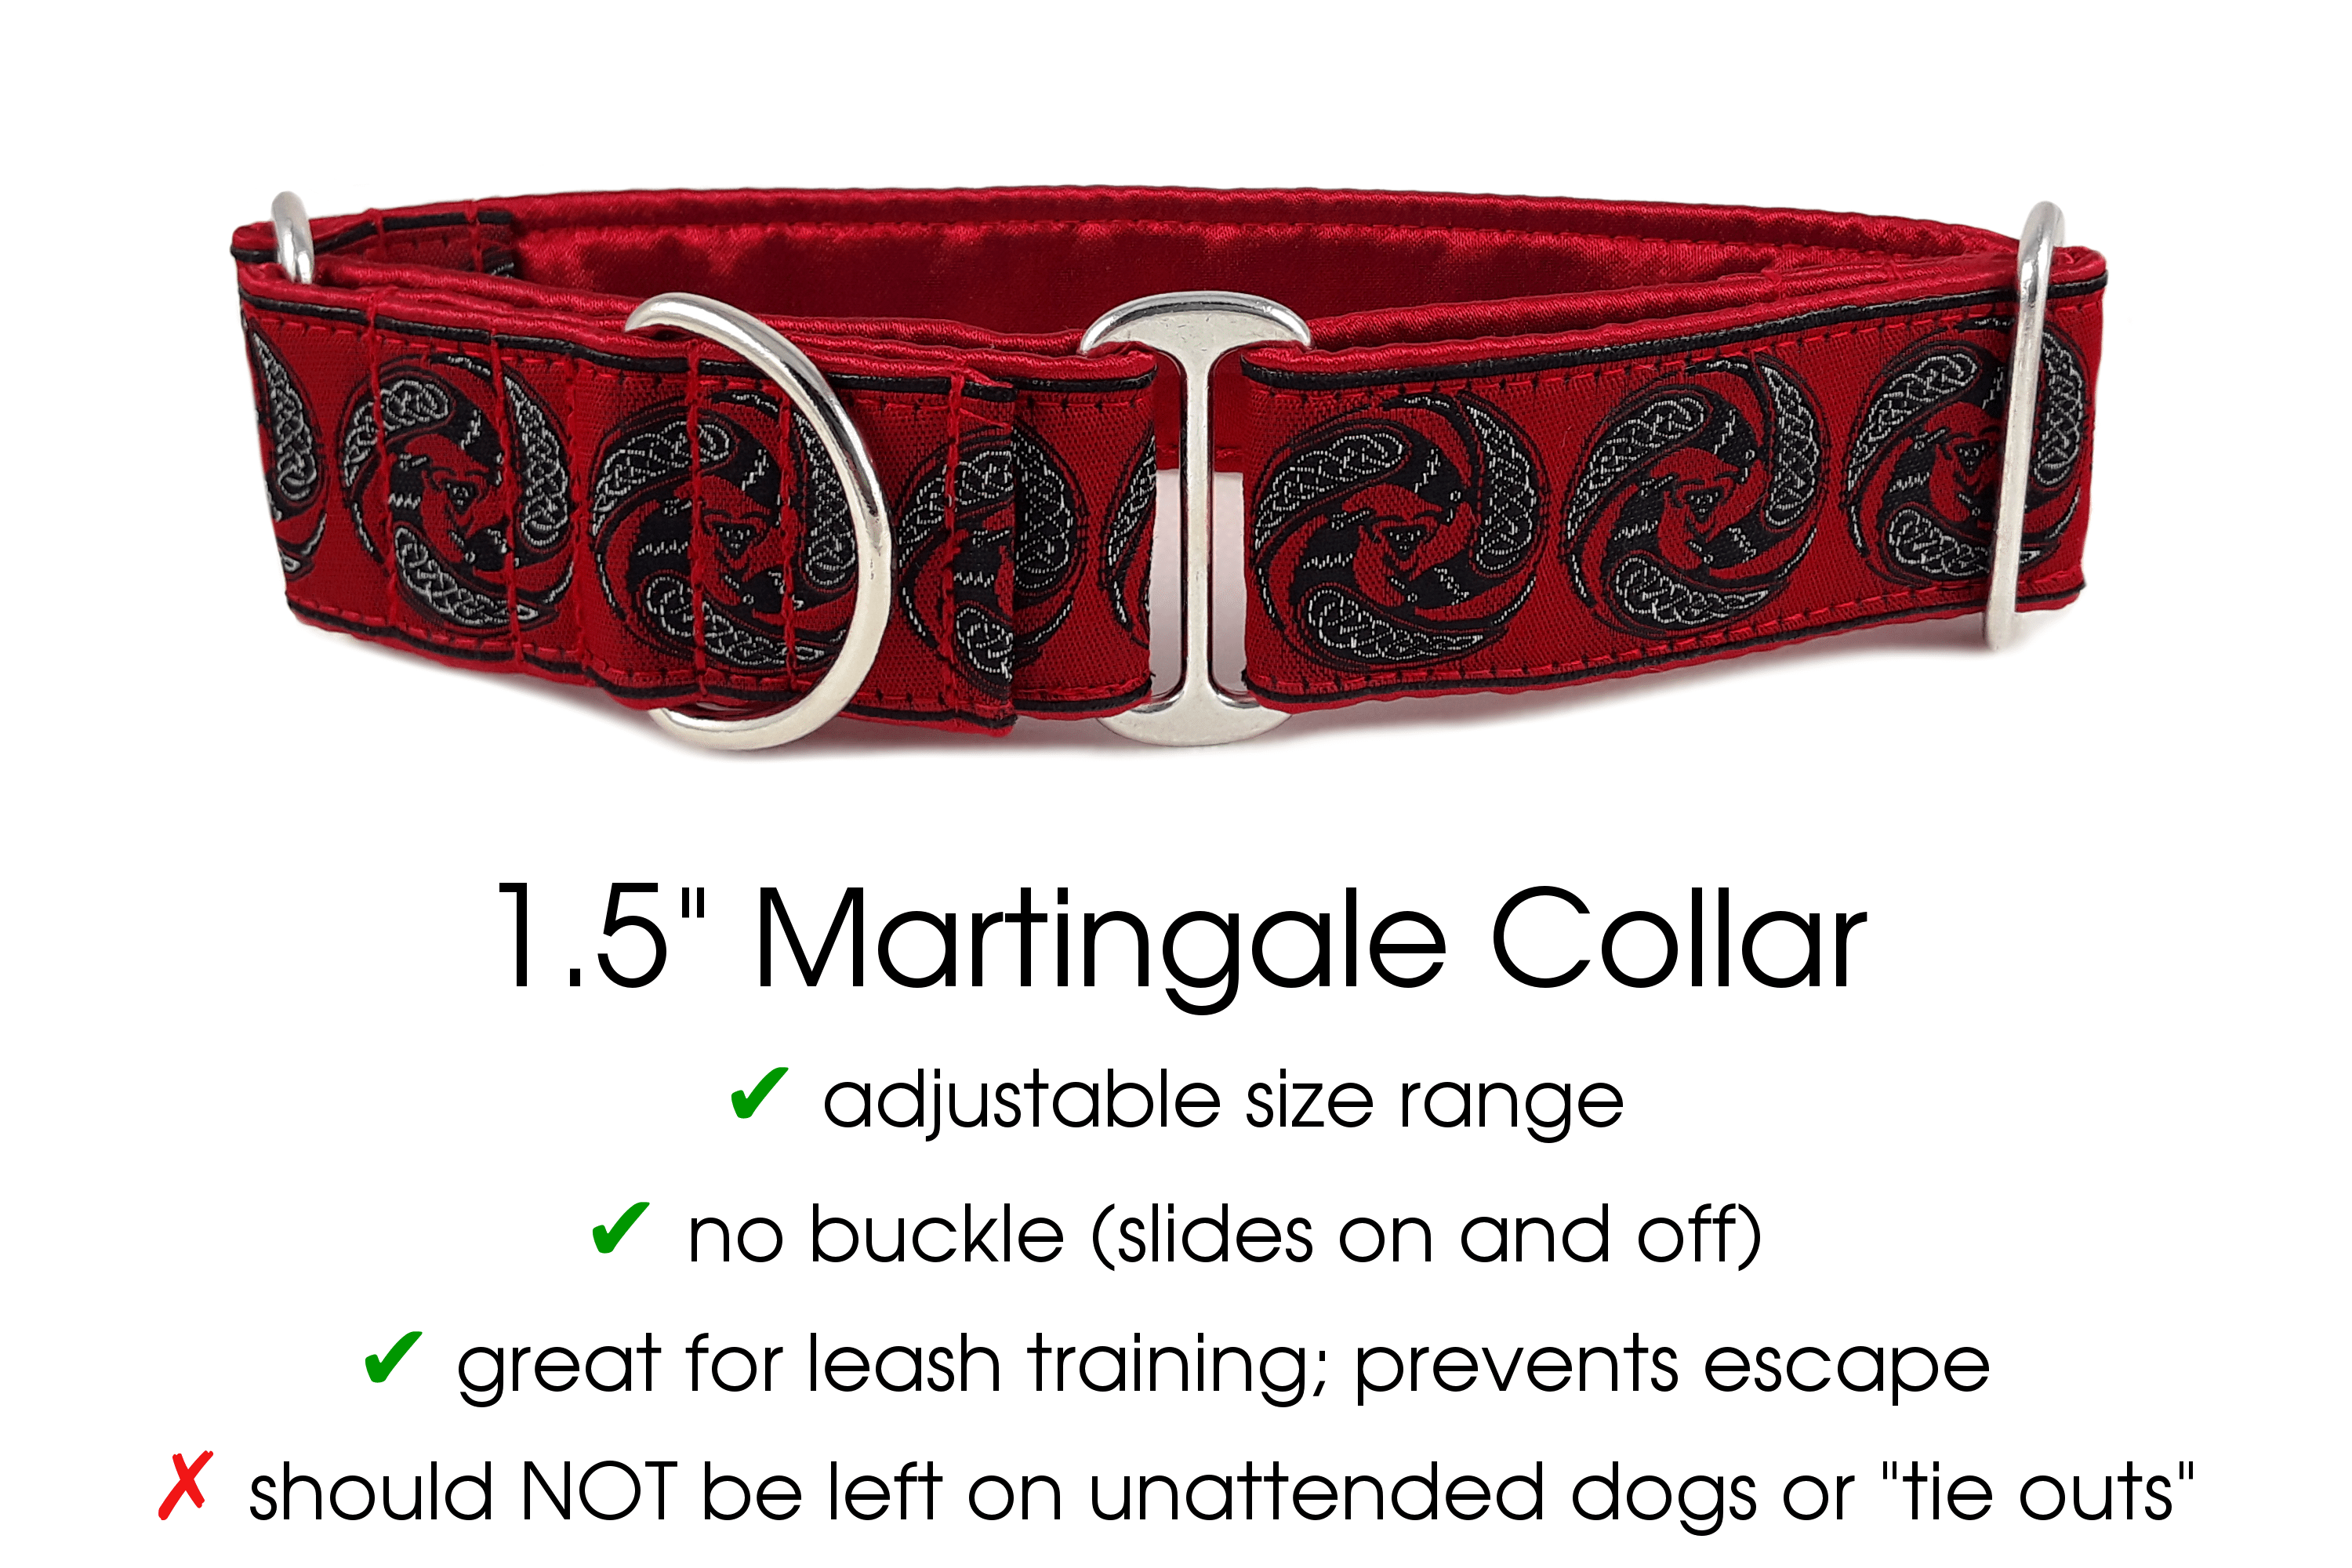 Celtic Ravens in Red - Martingale Dog Collar or Buckle Dog Collar - 1.5" Width - The Hound Haberdashery